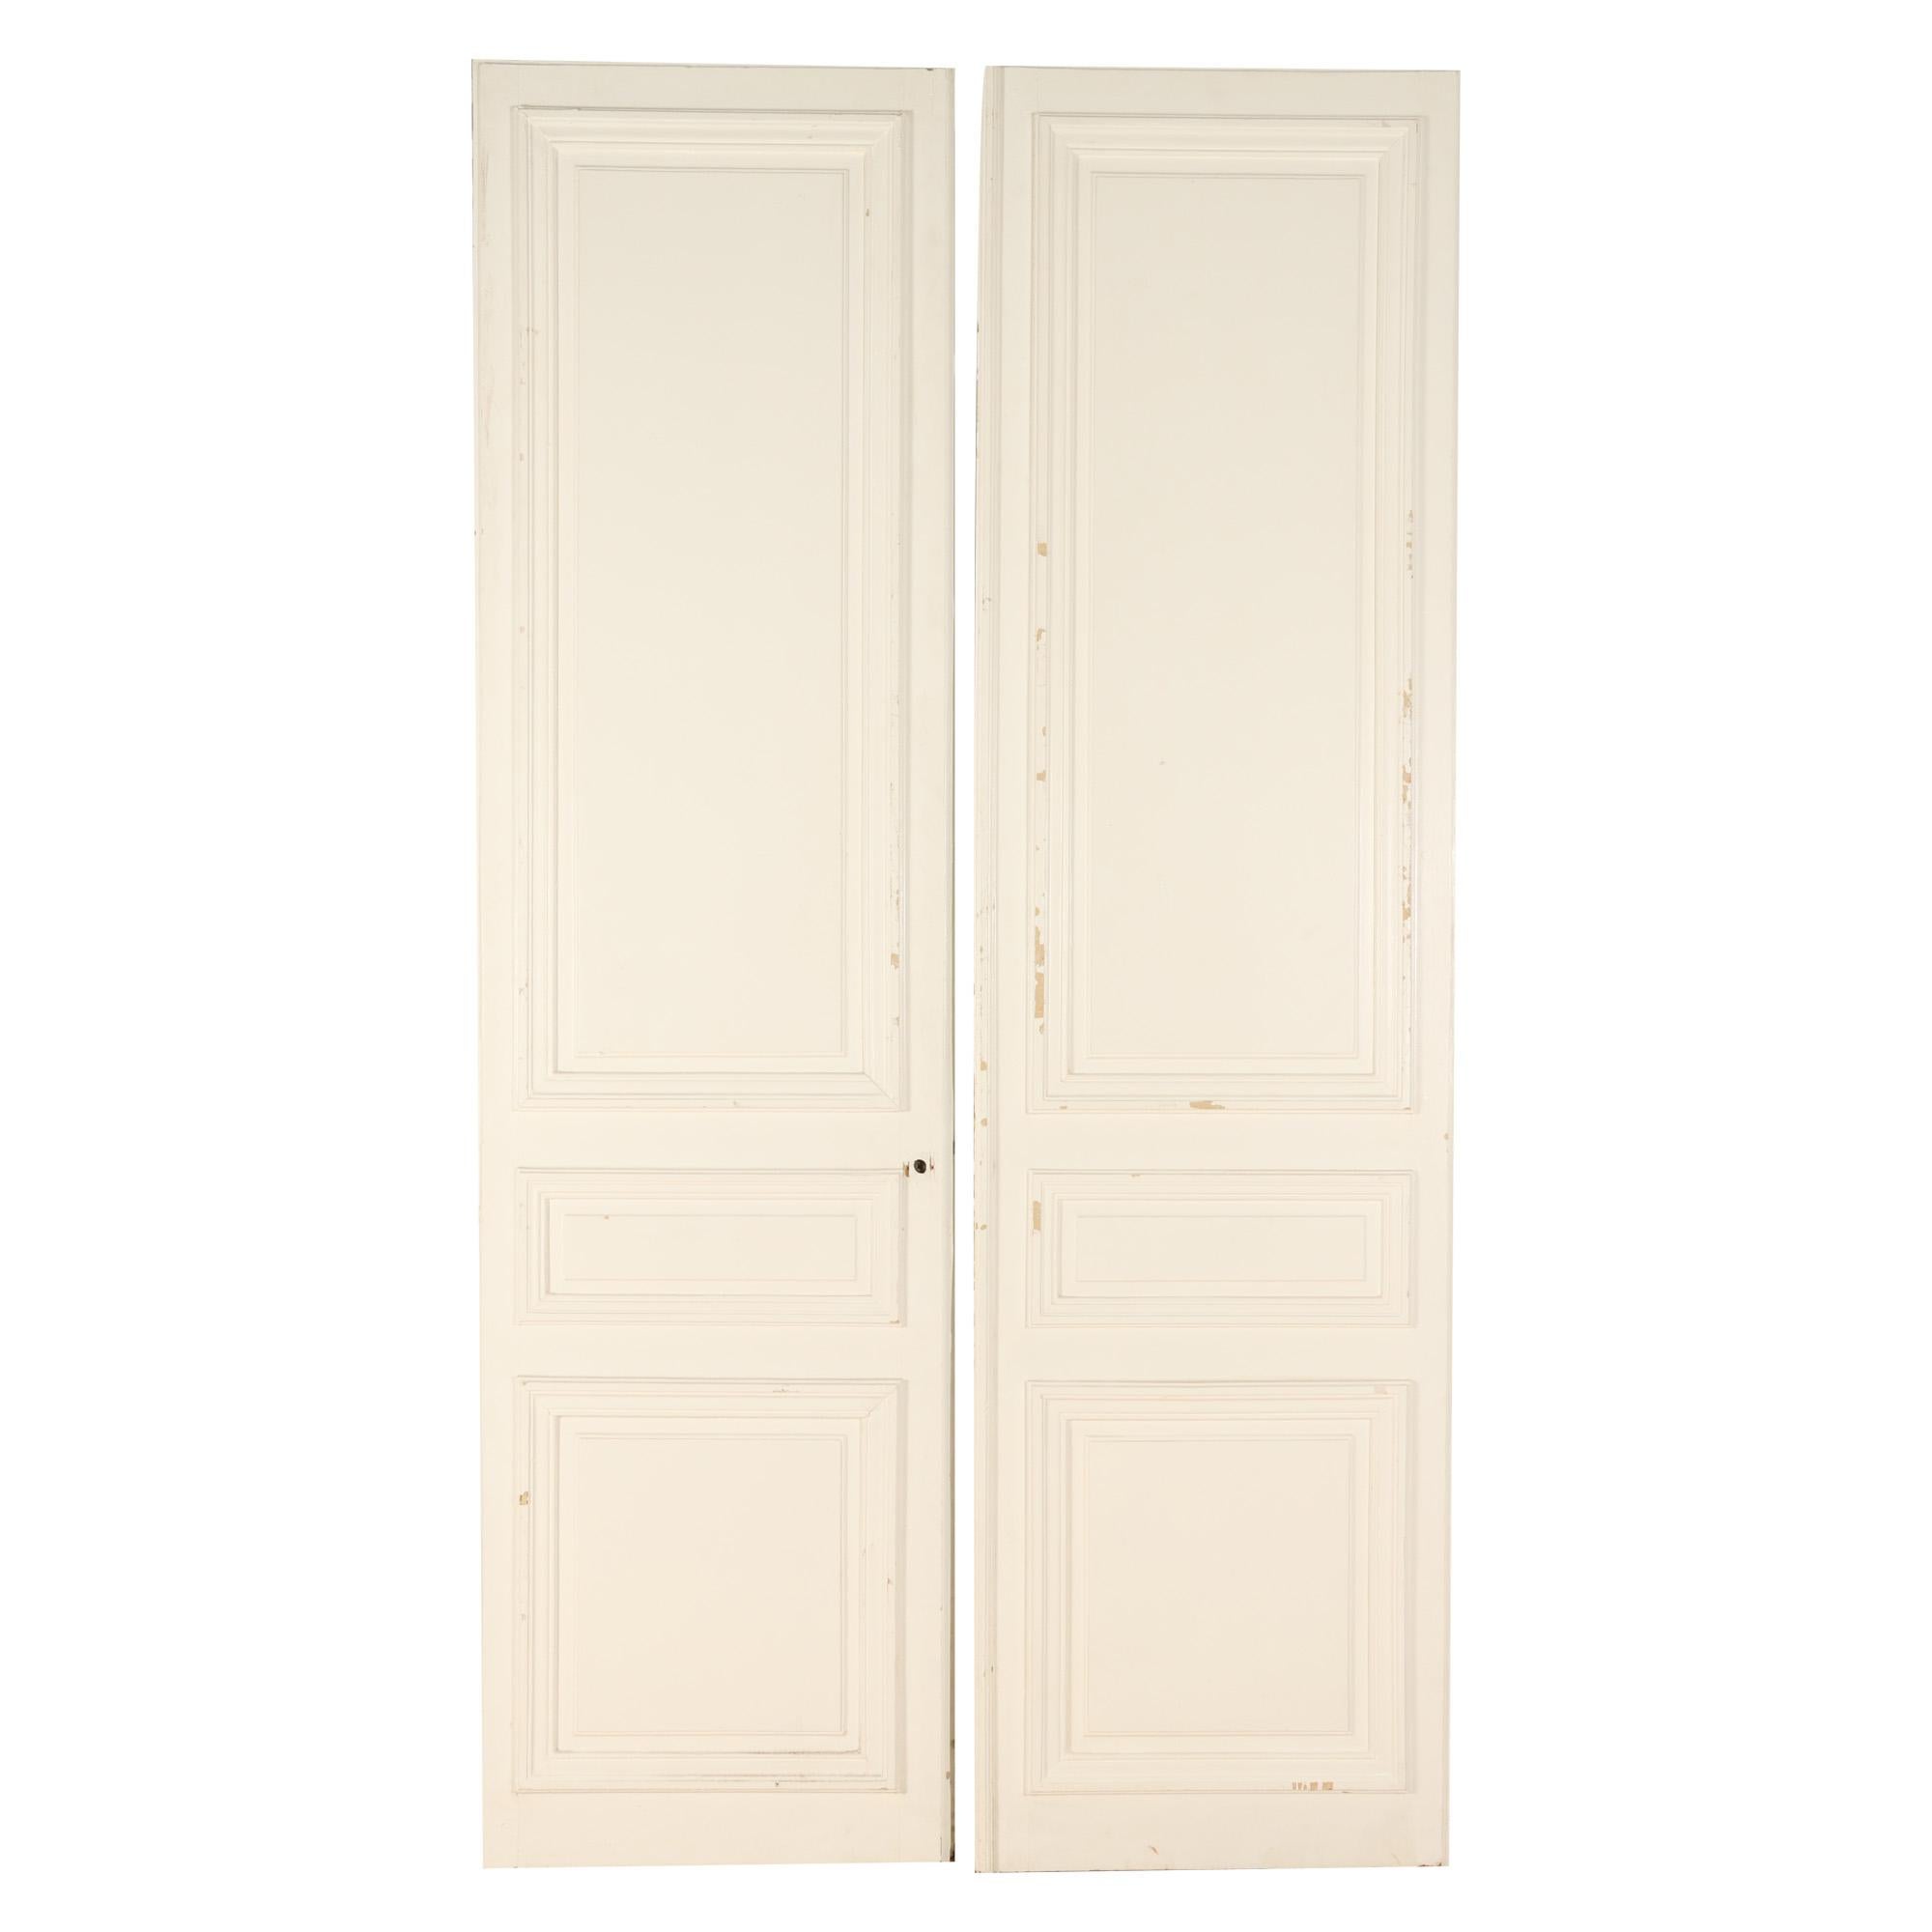 Early 20th Century Pair of Painted French Doors C 1900 For Sale